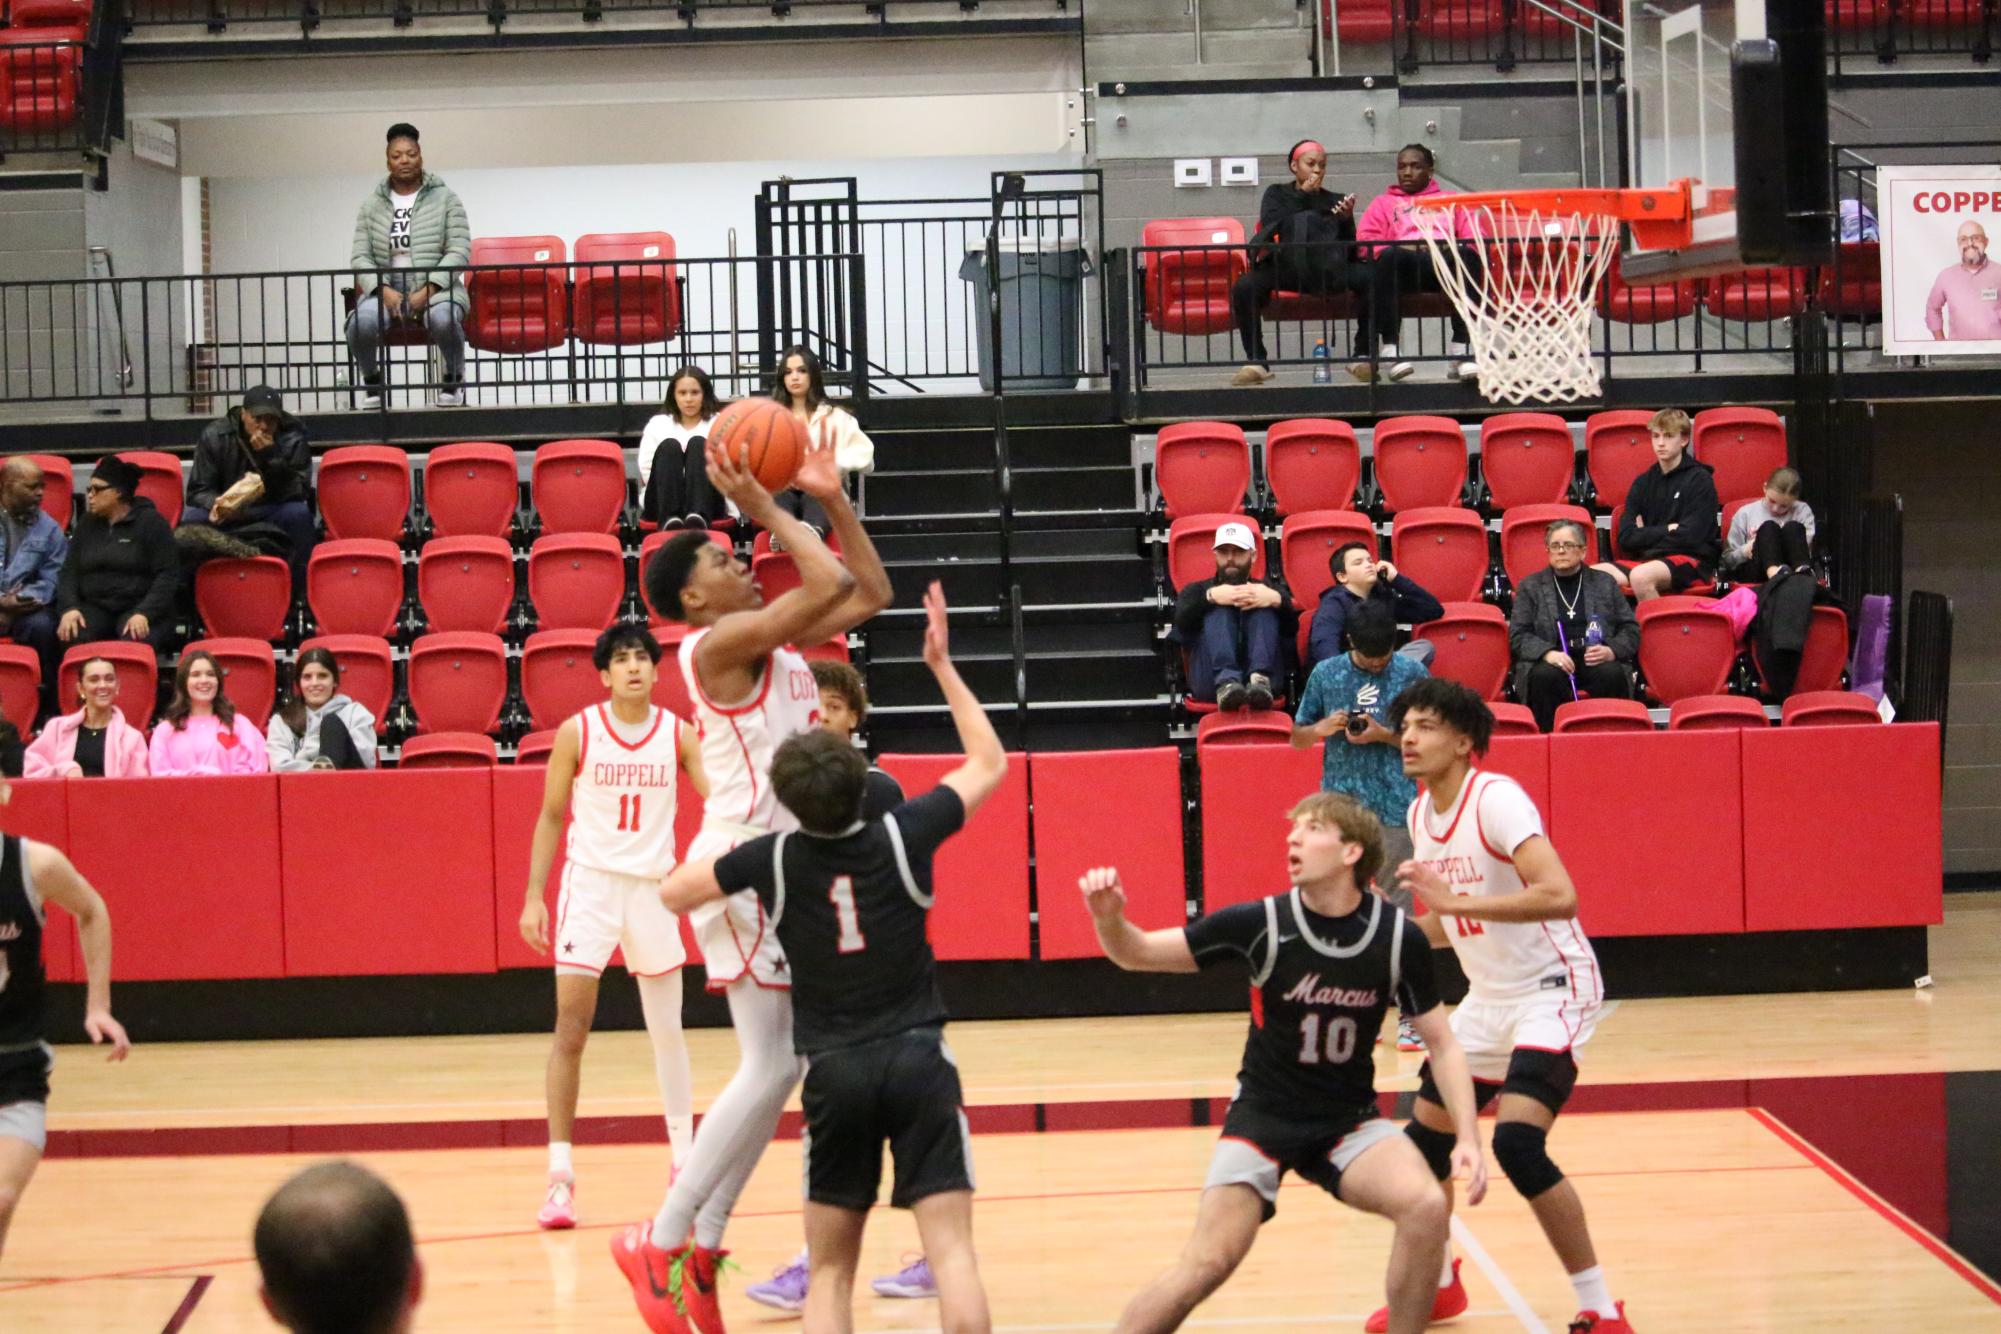 Coppell Boys Basketball to Challenge Top Team Plano East Panthers in Clean Game with Focus on Defense and Opportunity Maximization